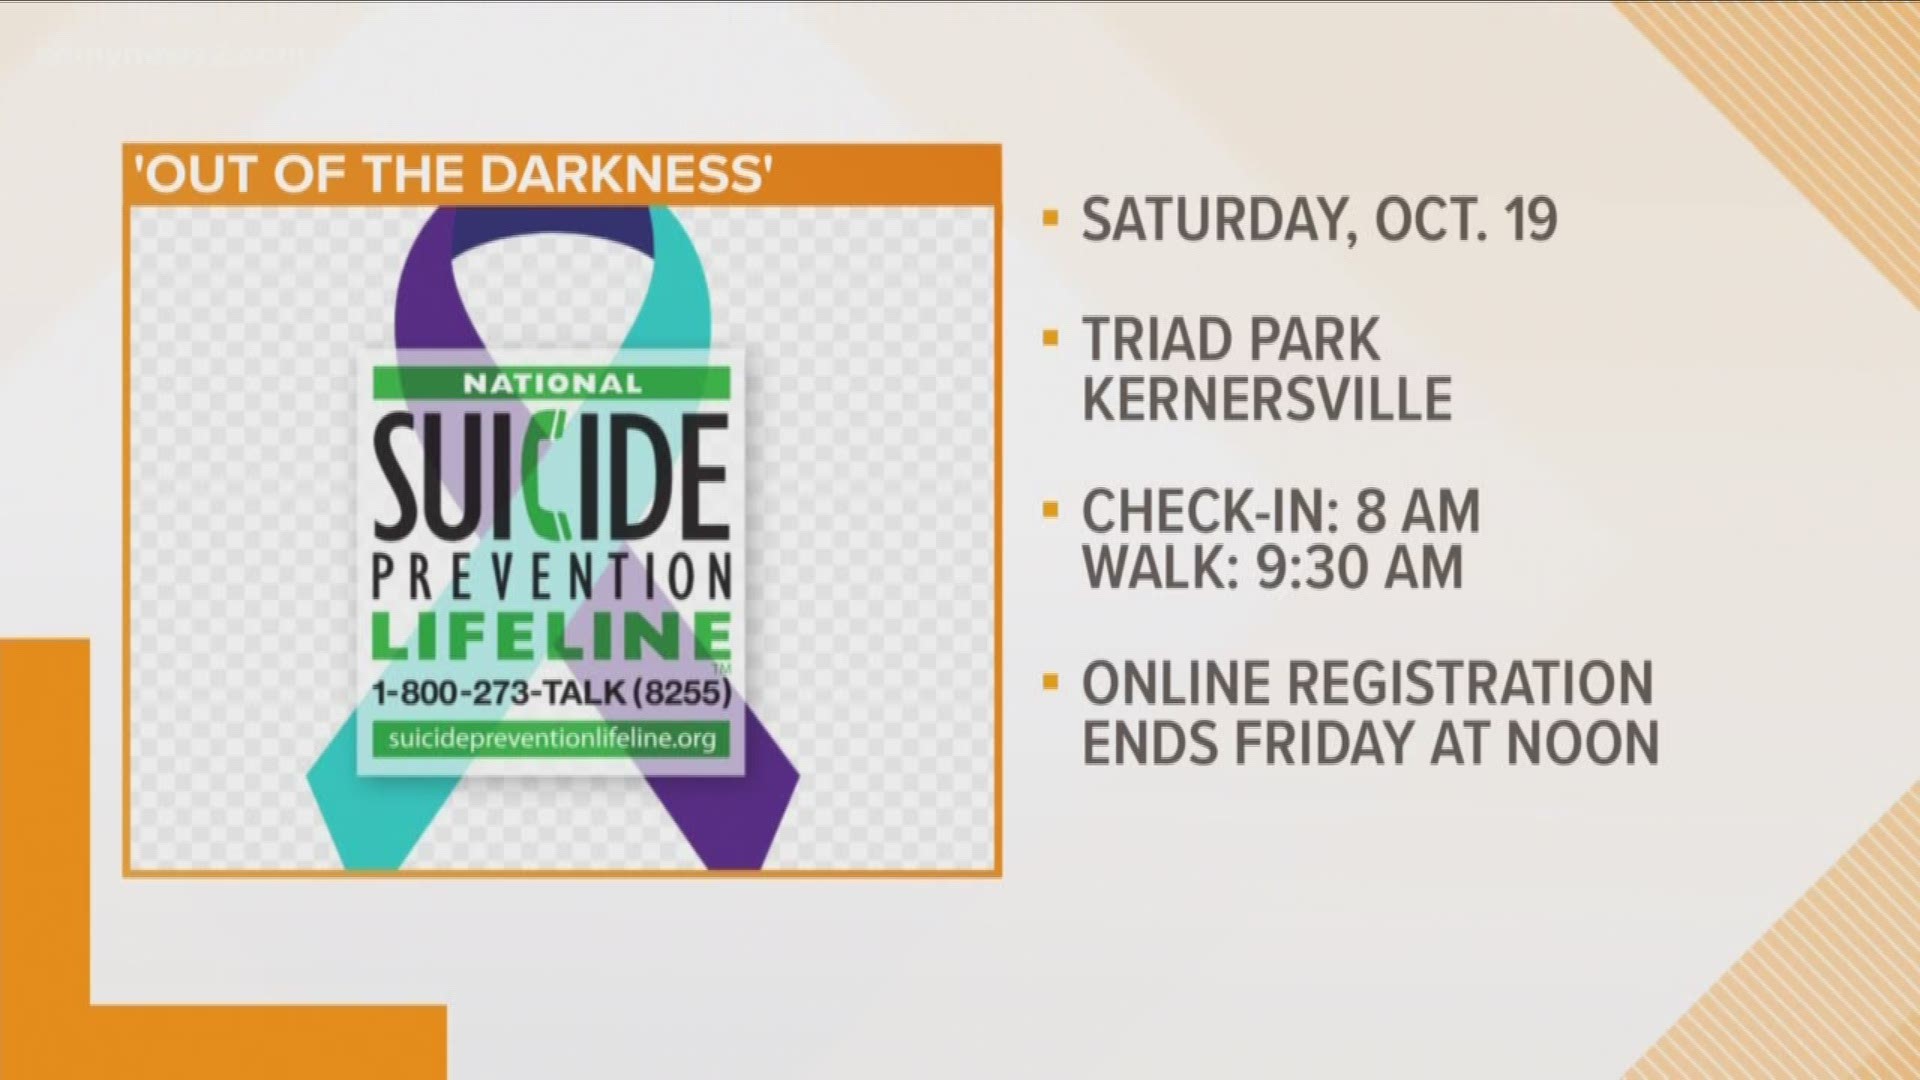 This October 19th, hundreds of family members and survivors will lead the Out of the Darkness Walk, an annual race benefiting suicide prevention and research.